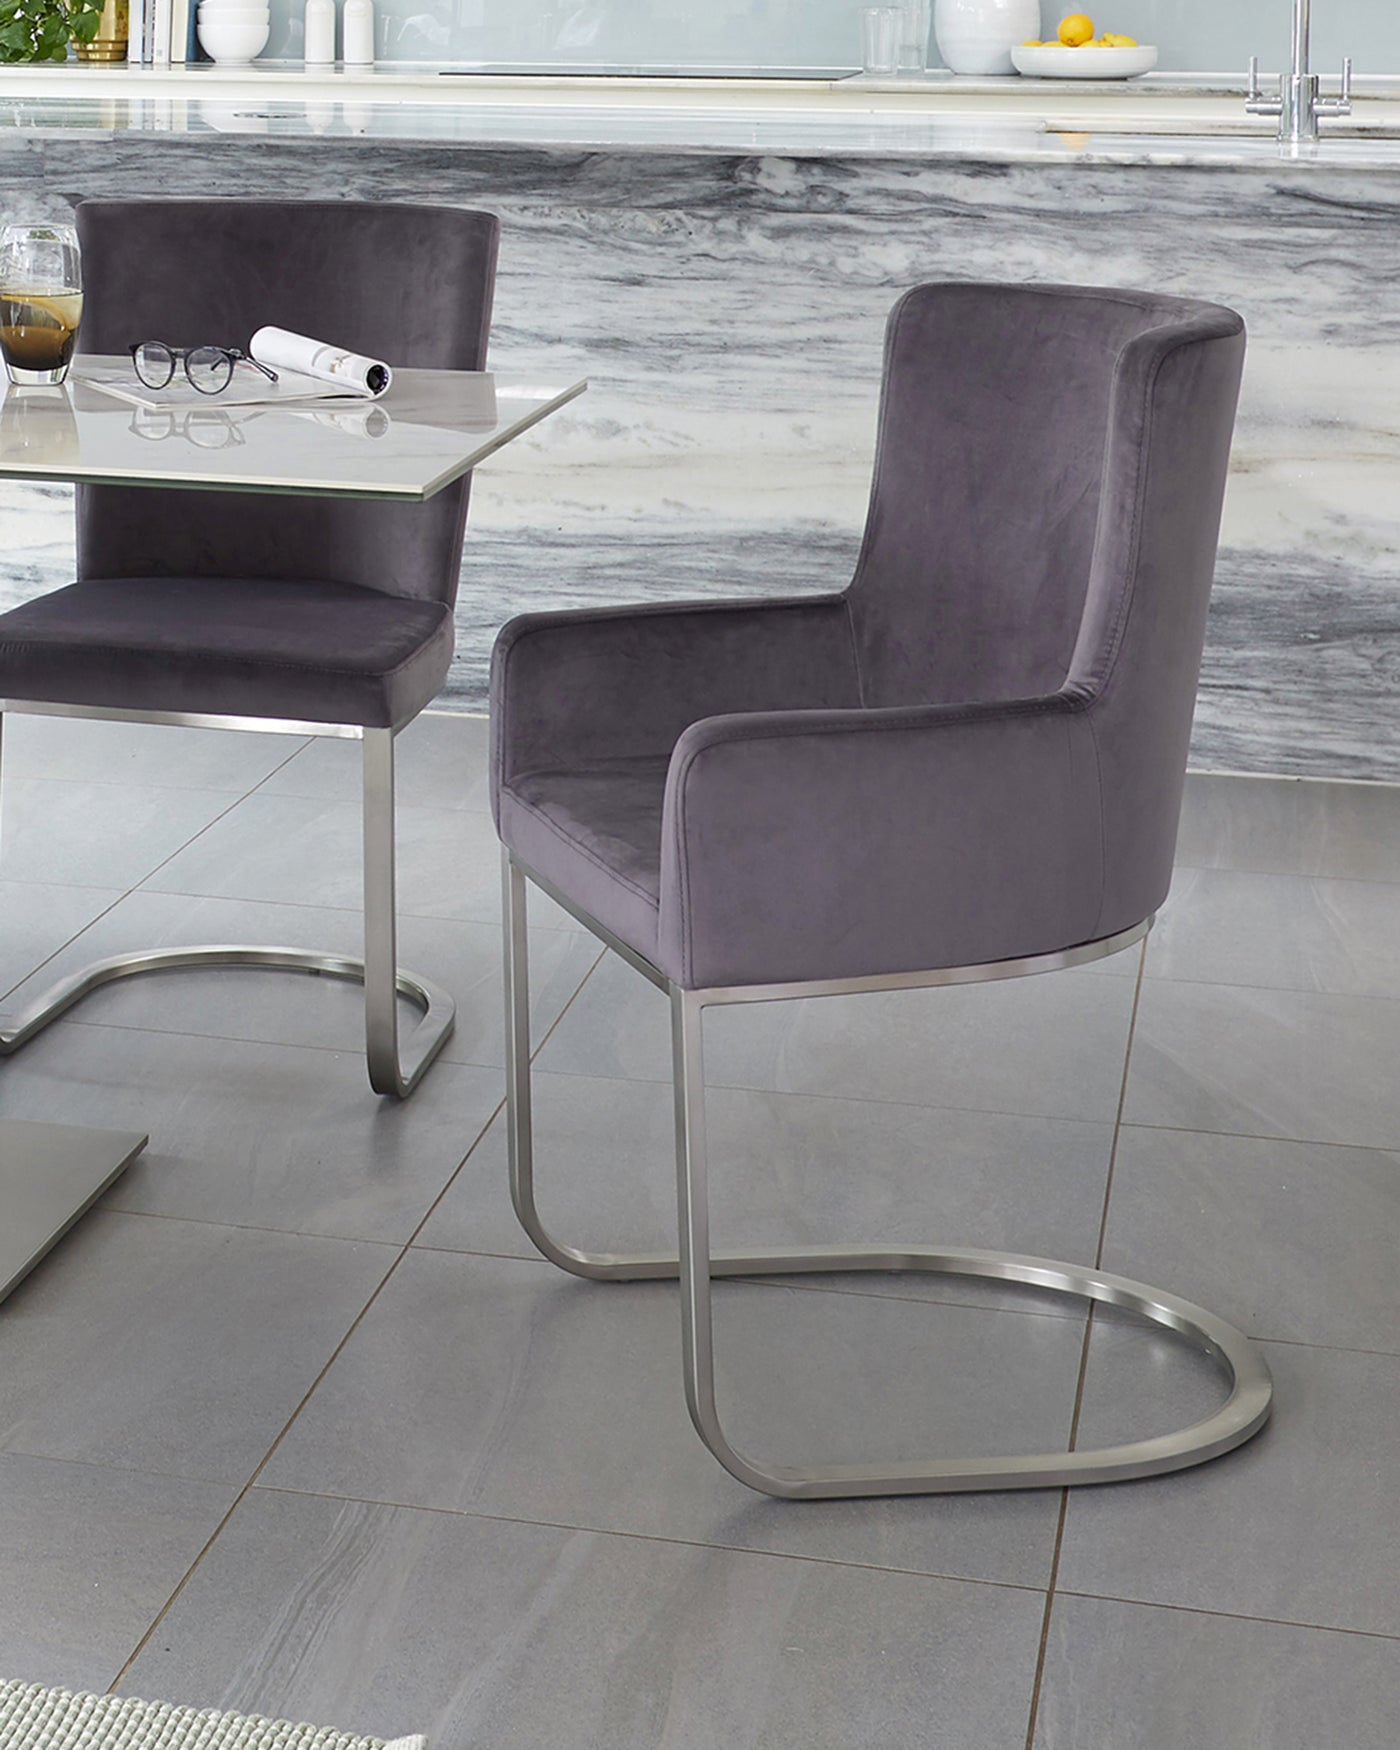 Modern furniture collection featuring a glass accent table with a chrome frame and two contemporary cantilever dining chairs upholstered in a plush grey fabric with a smooth metallic base.